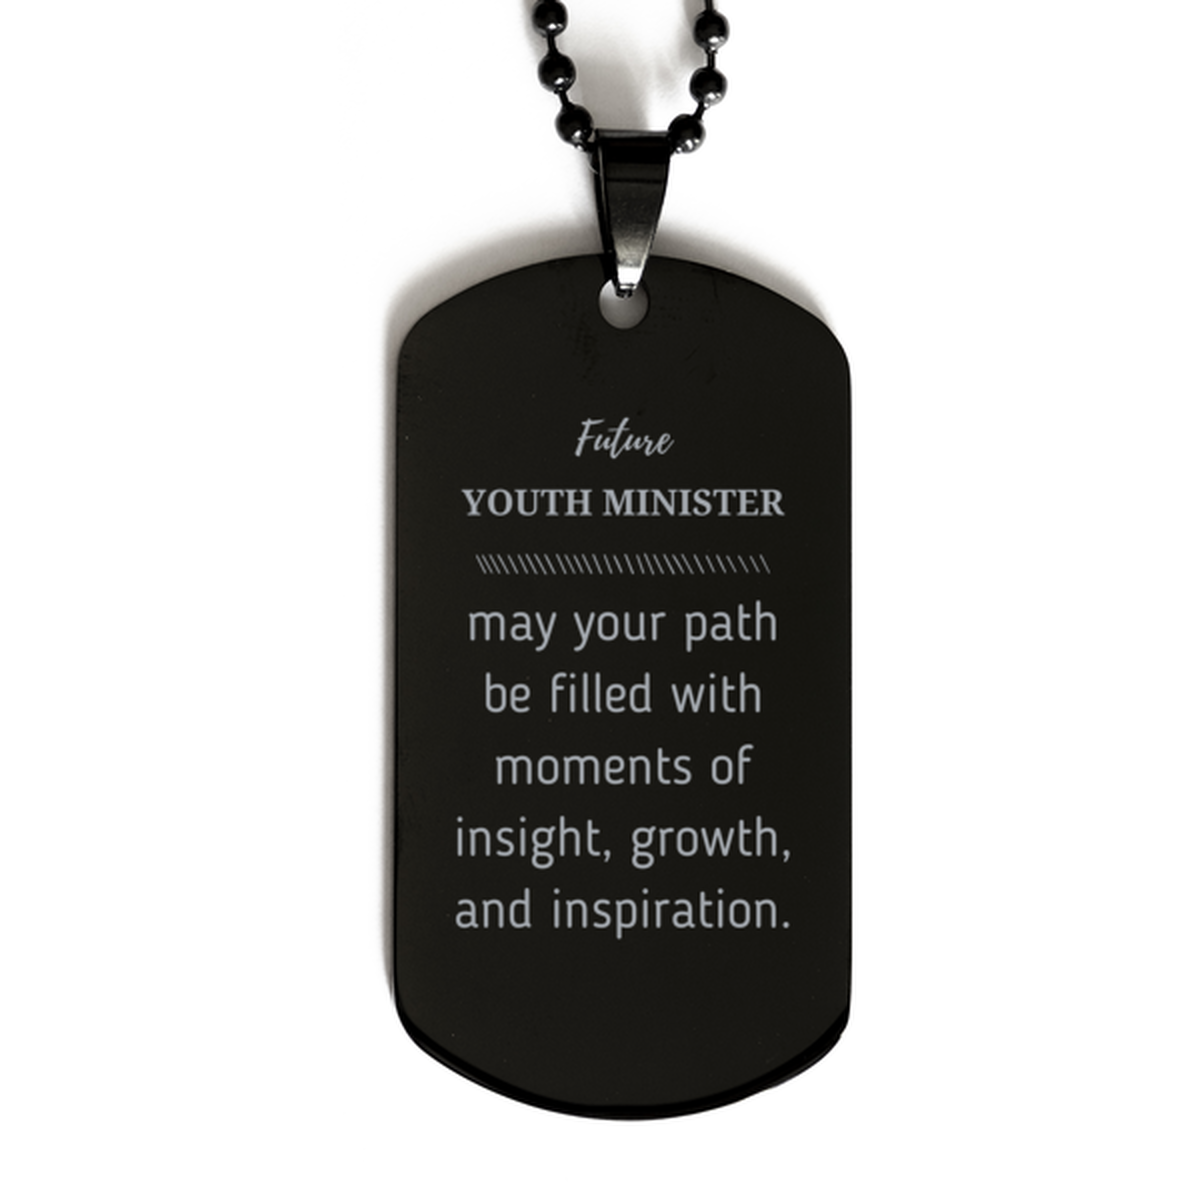 Future Youth Minister Gifts, May your path be filled with moments of insight, Graduation Gifts for New Youth Minister, Christmas Unique Black Dog Tag For Men, Women, Friends